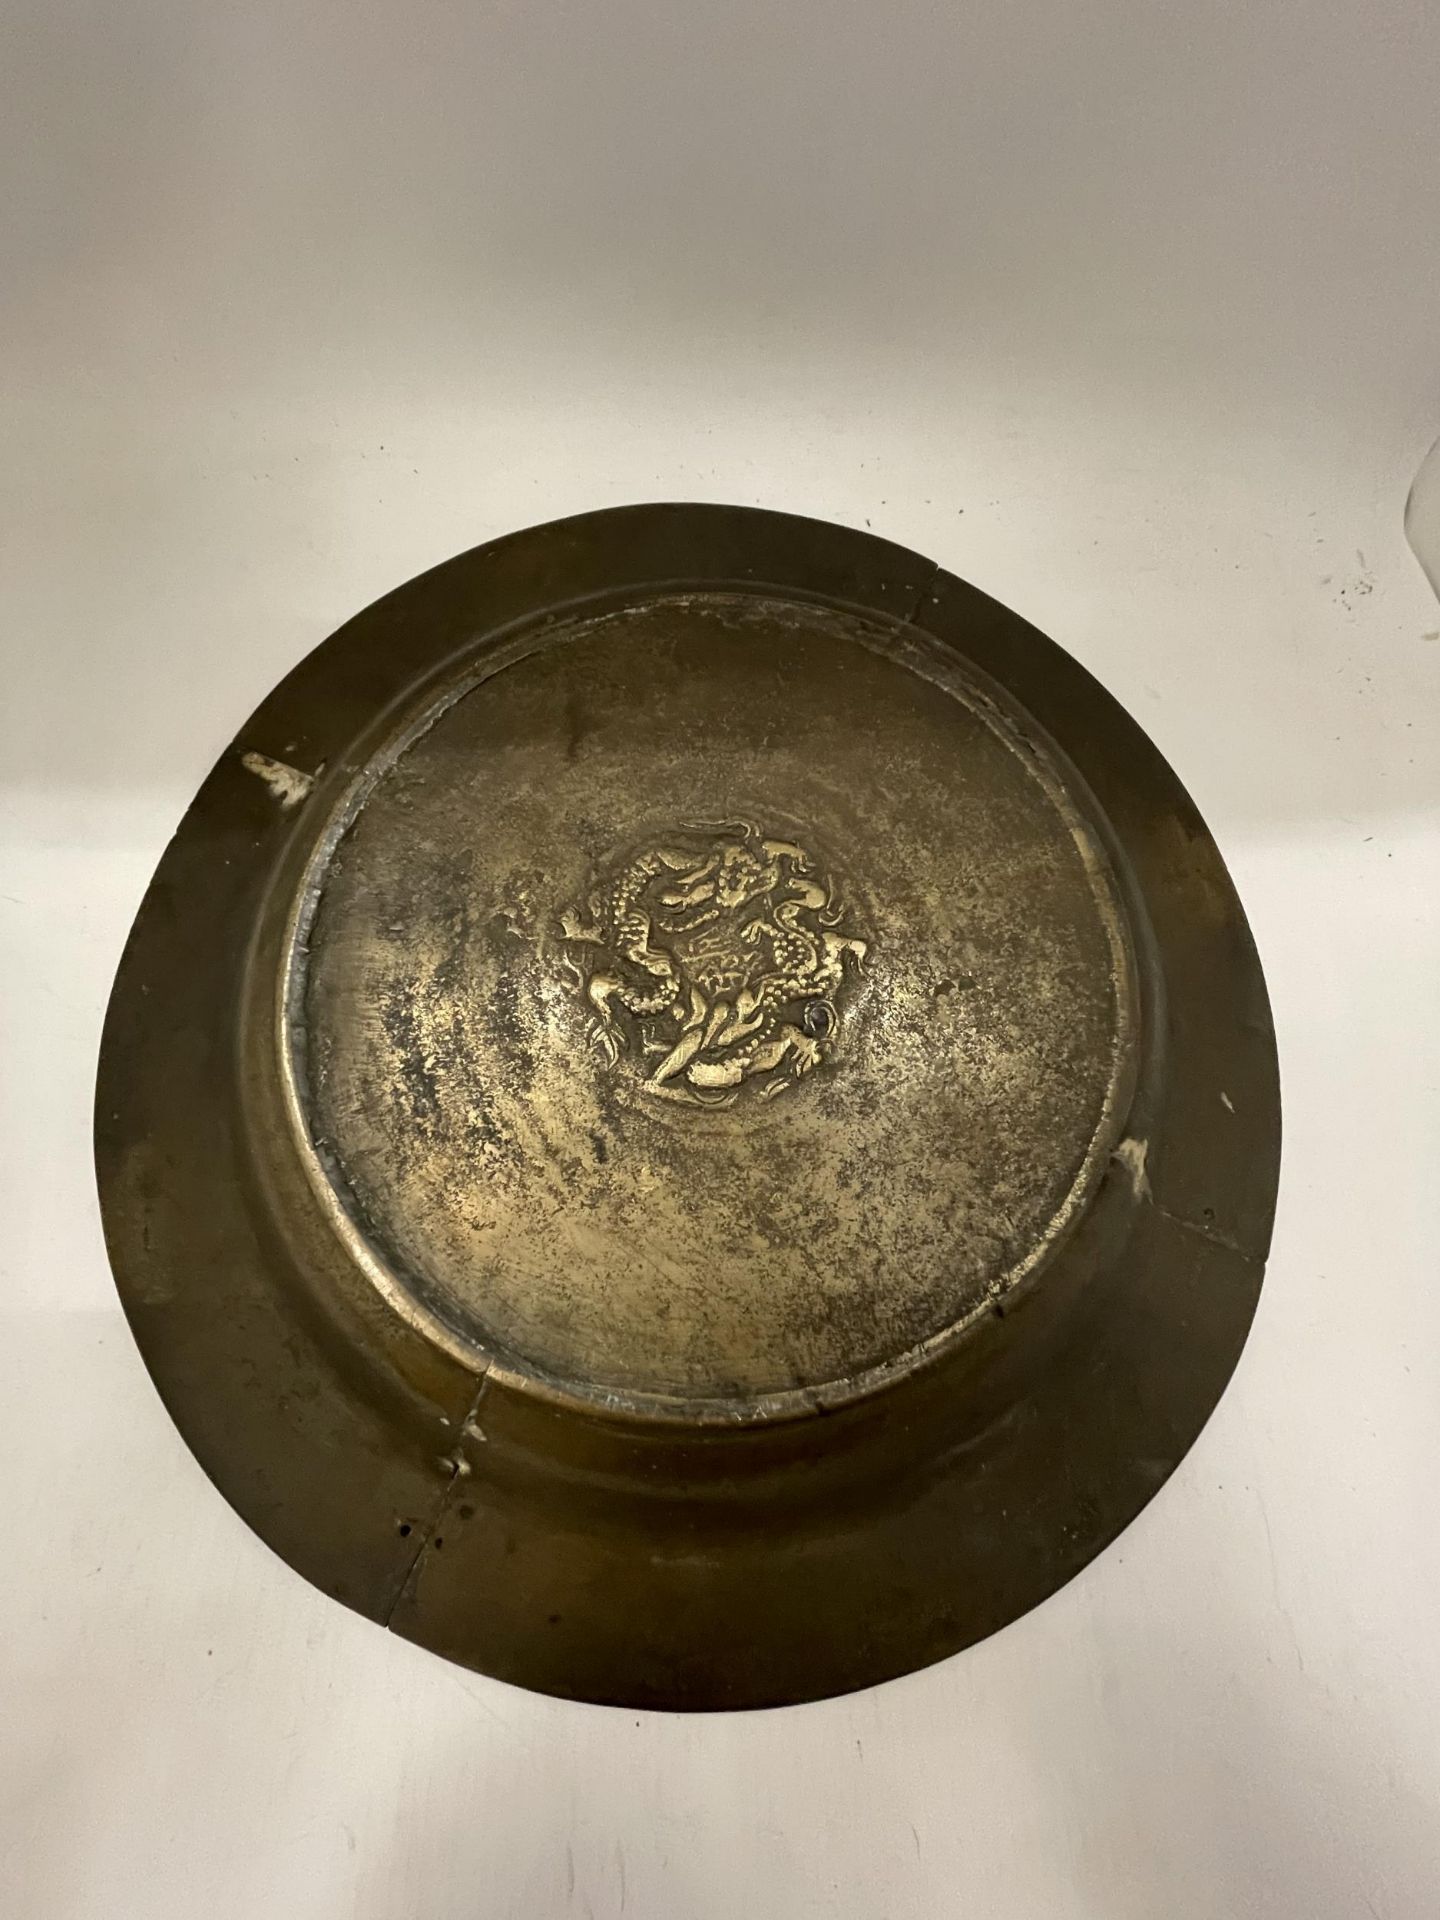 A VINTAGE ORIENTAL BRASS CHARGER PLATE WITH KOI CARP FISH DESIGN - Image 3 of 4